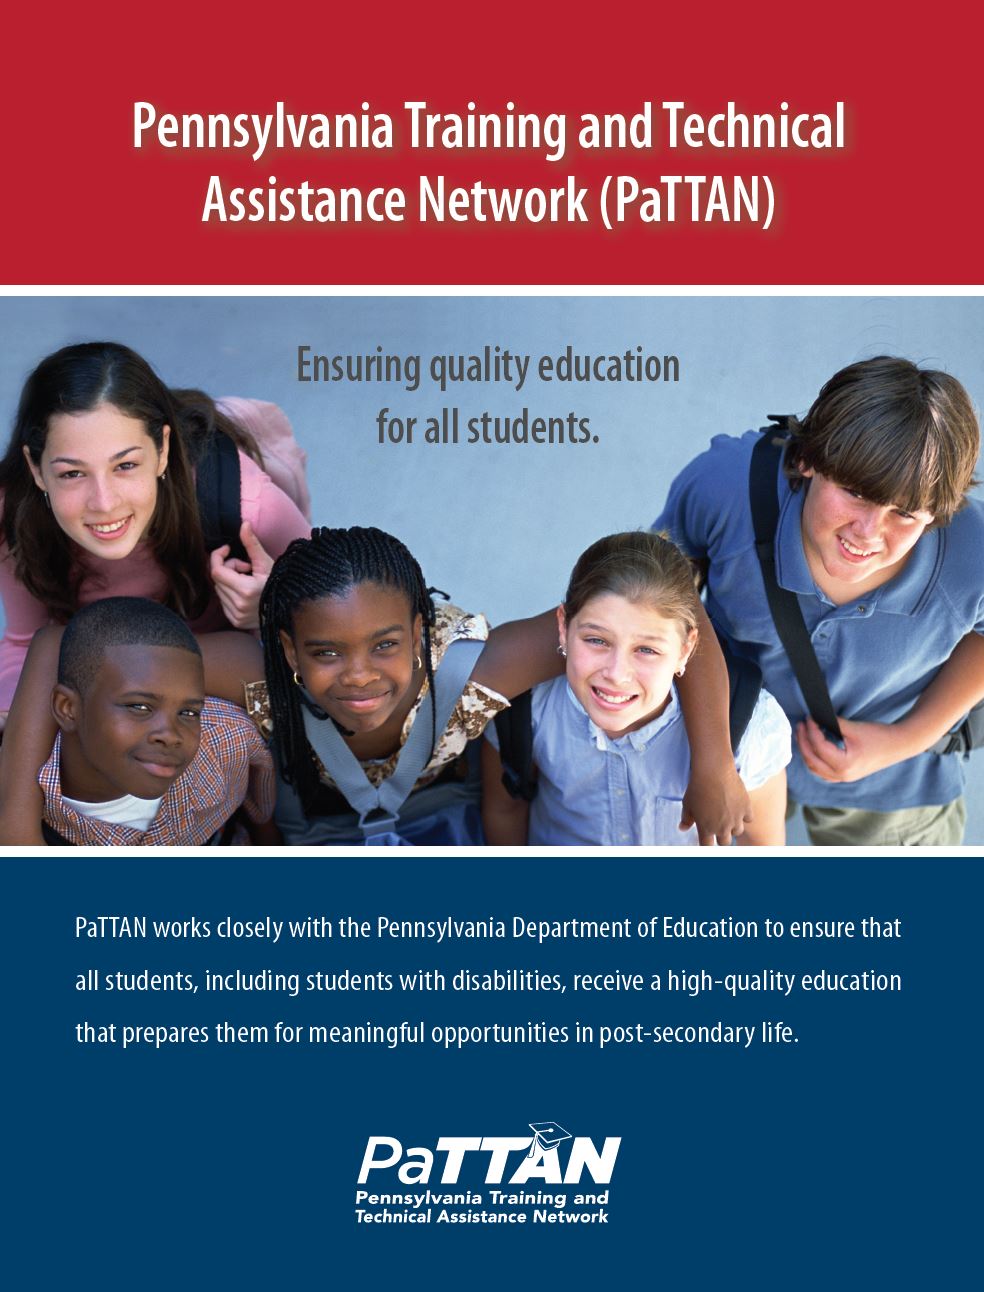 PaTTAN: Ensuring Quality Education for all Students